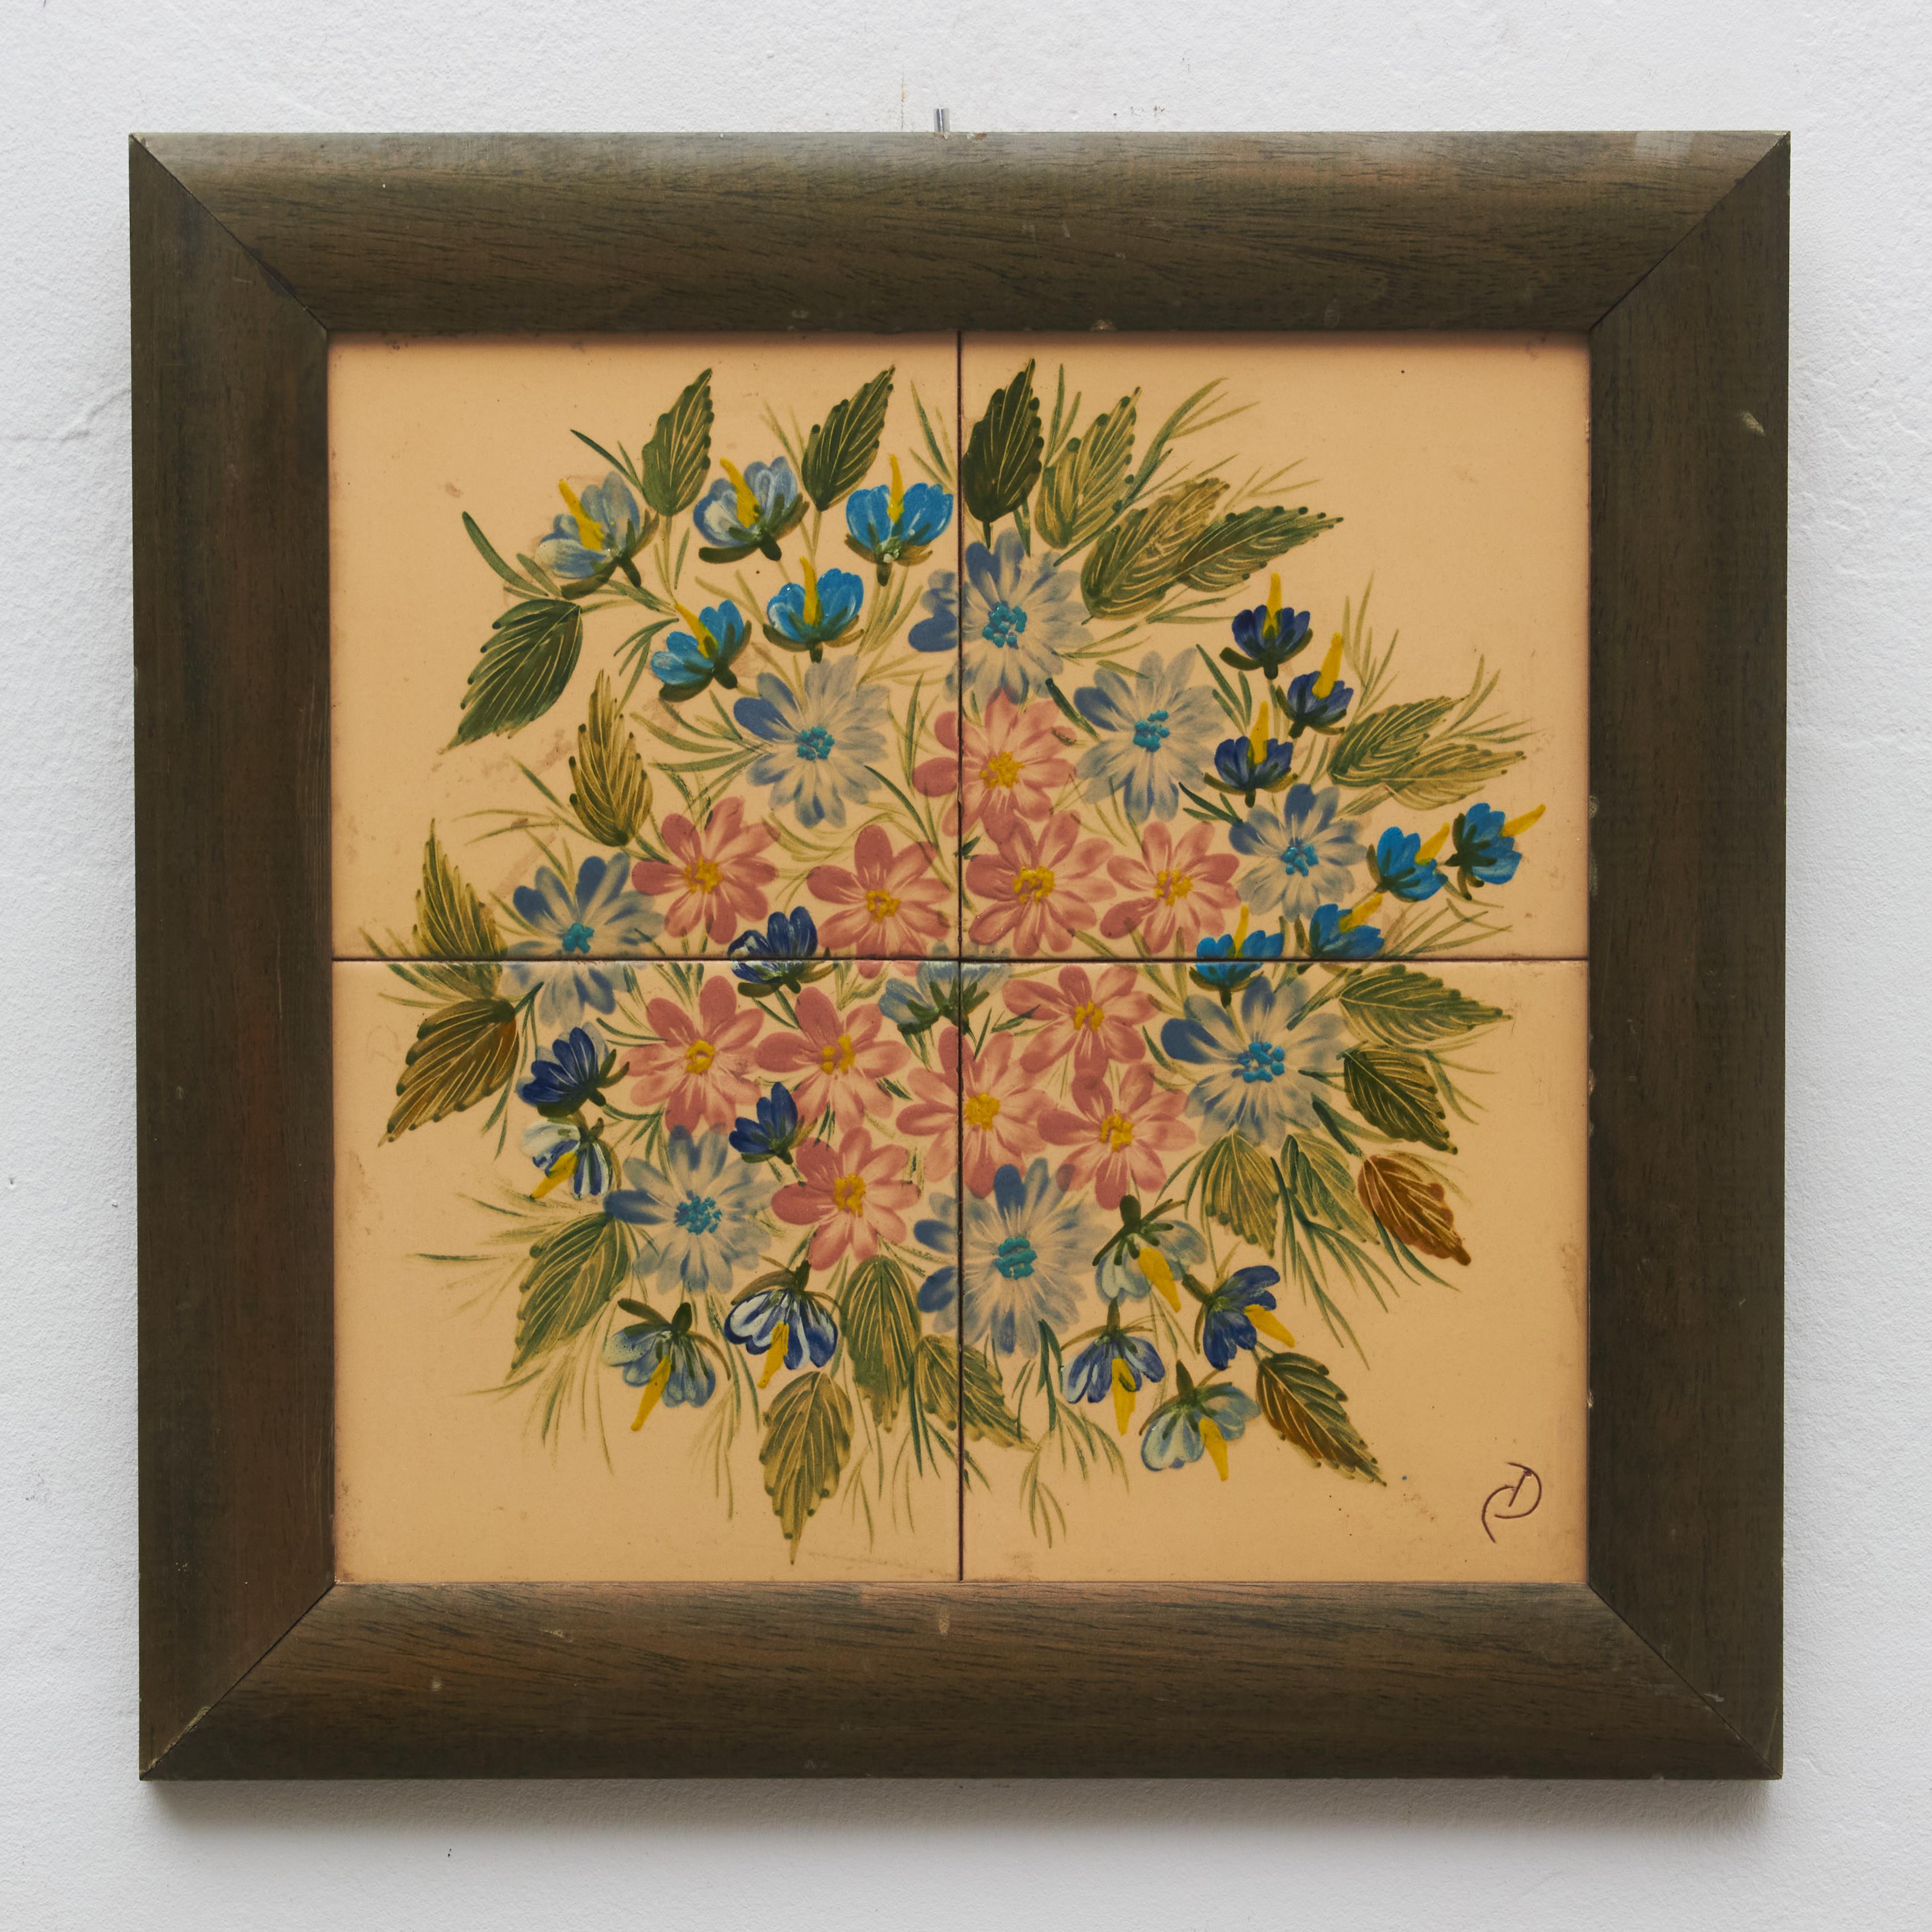 Ceramic hand painted artwork of flowers by Catalan artist Diaz Costa, circa 1960.
Framed. Signed.

In original condition, with minor wear consistent of age and use, preserving a beautiul patina.